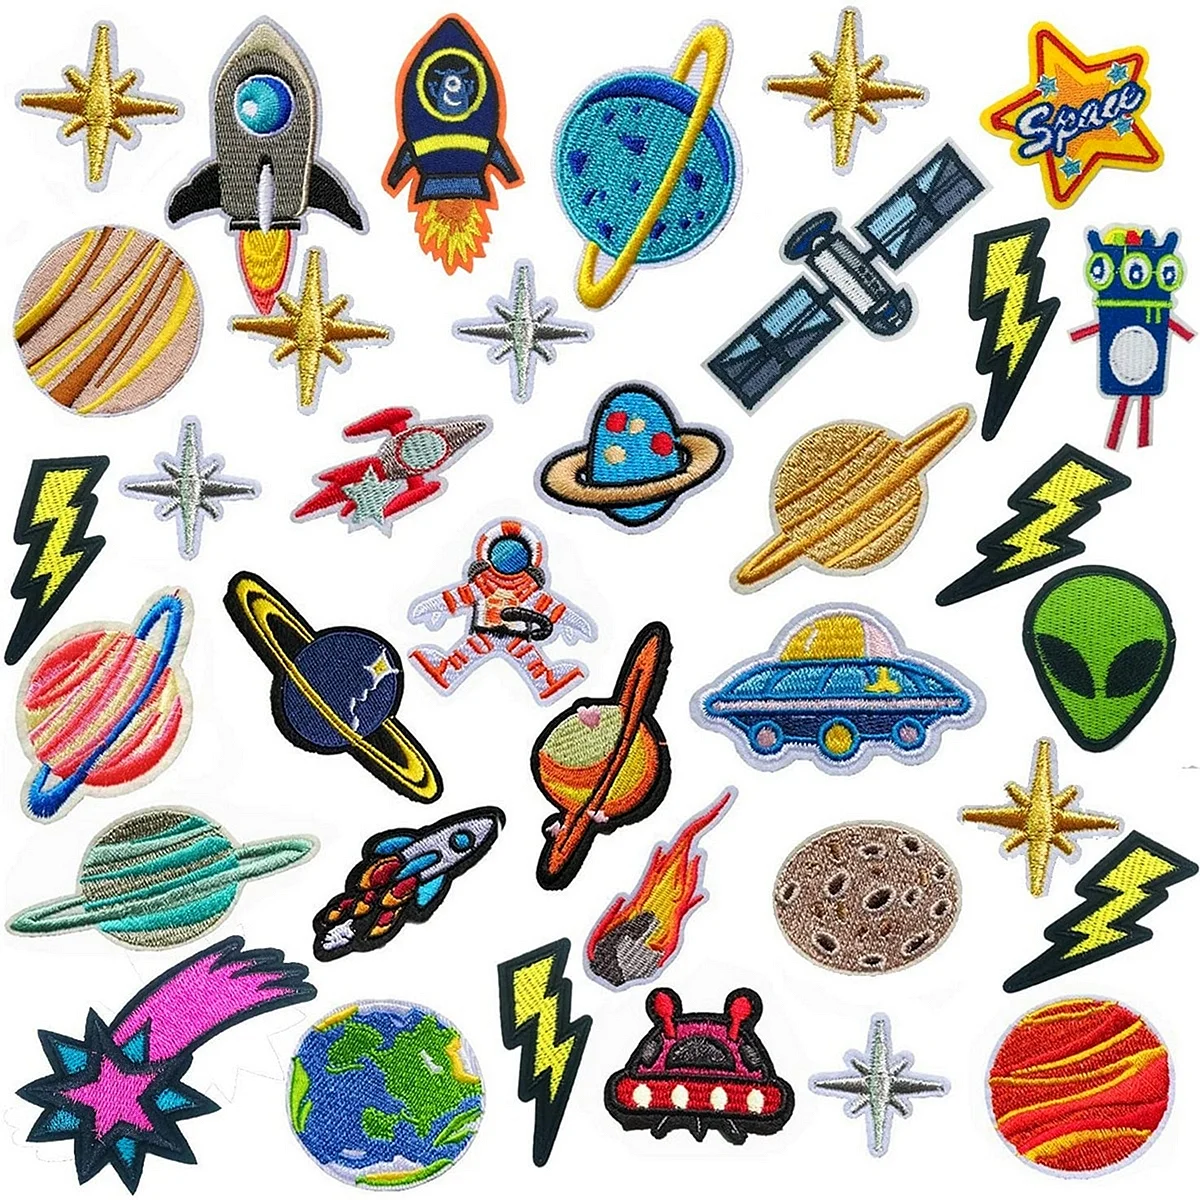 Alien Outer Space Round badge Patch Iron on Patches for Clothing Sew on Stickers on clothes Embroidered Patches for Applique DIY